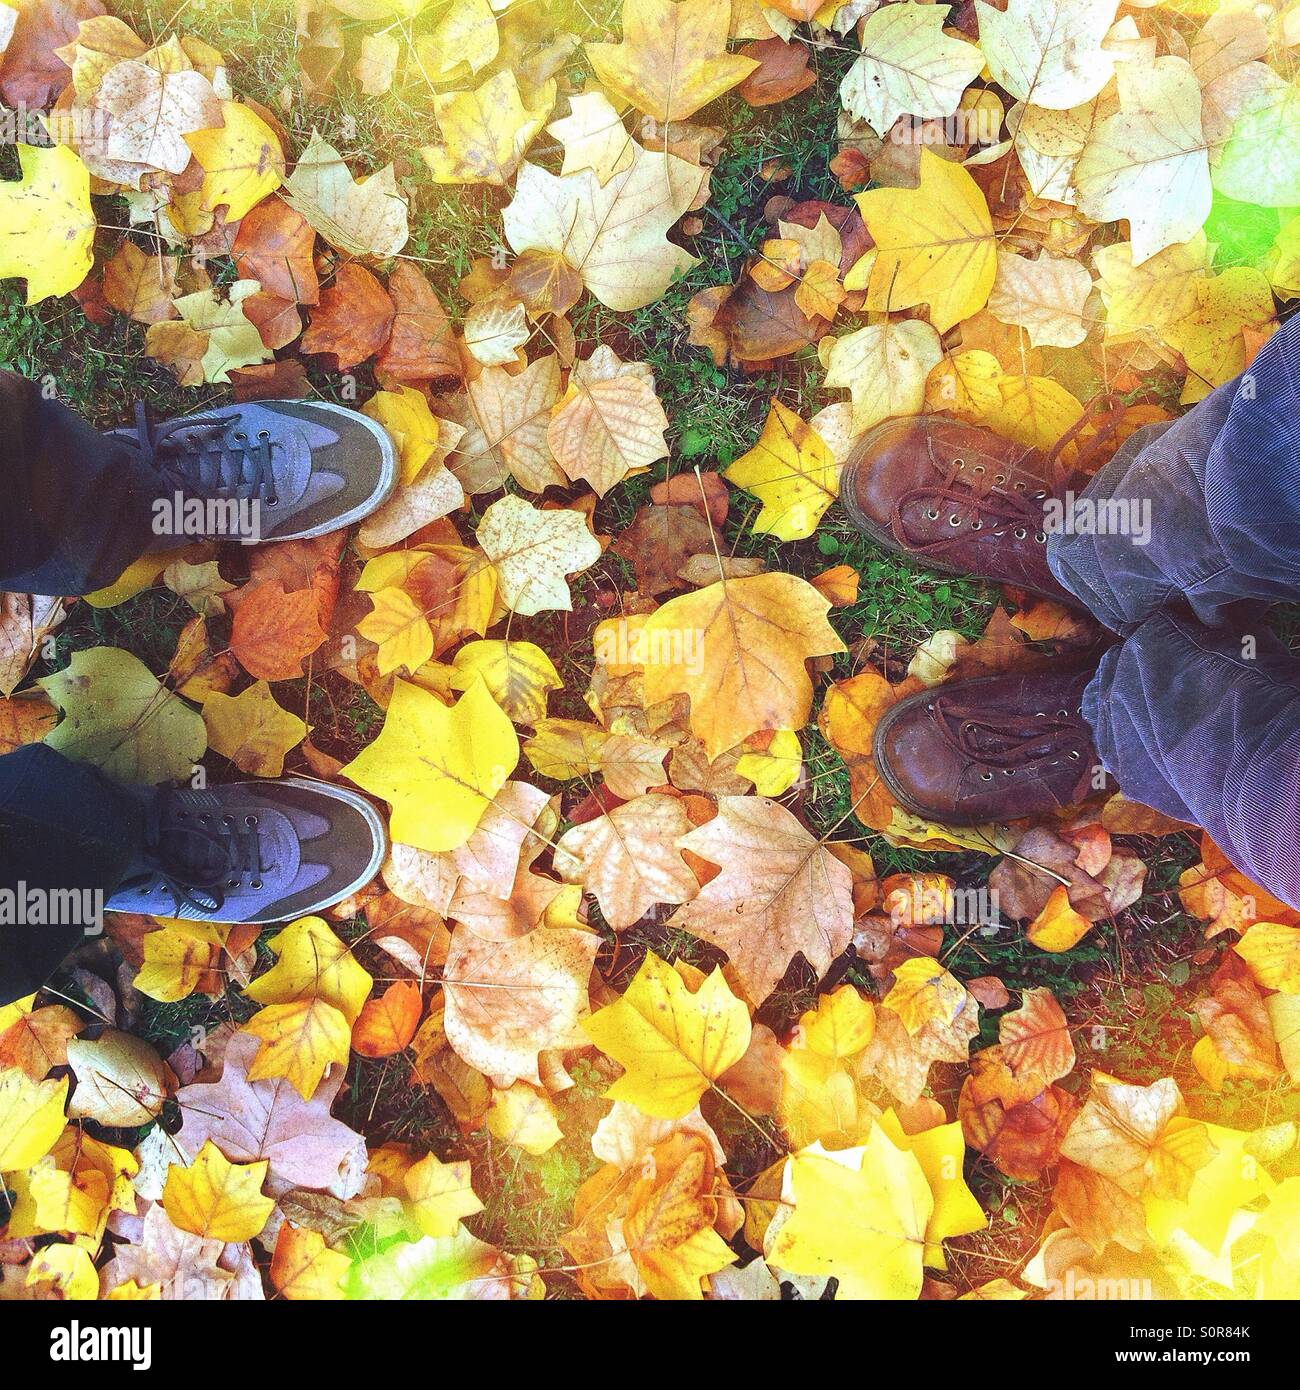 Two people standing in colorful autumn leaves Stock Photo